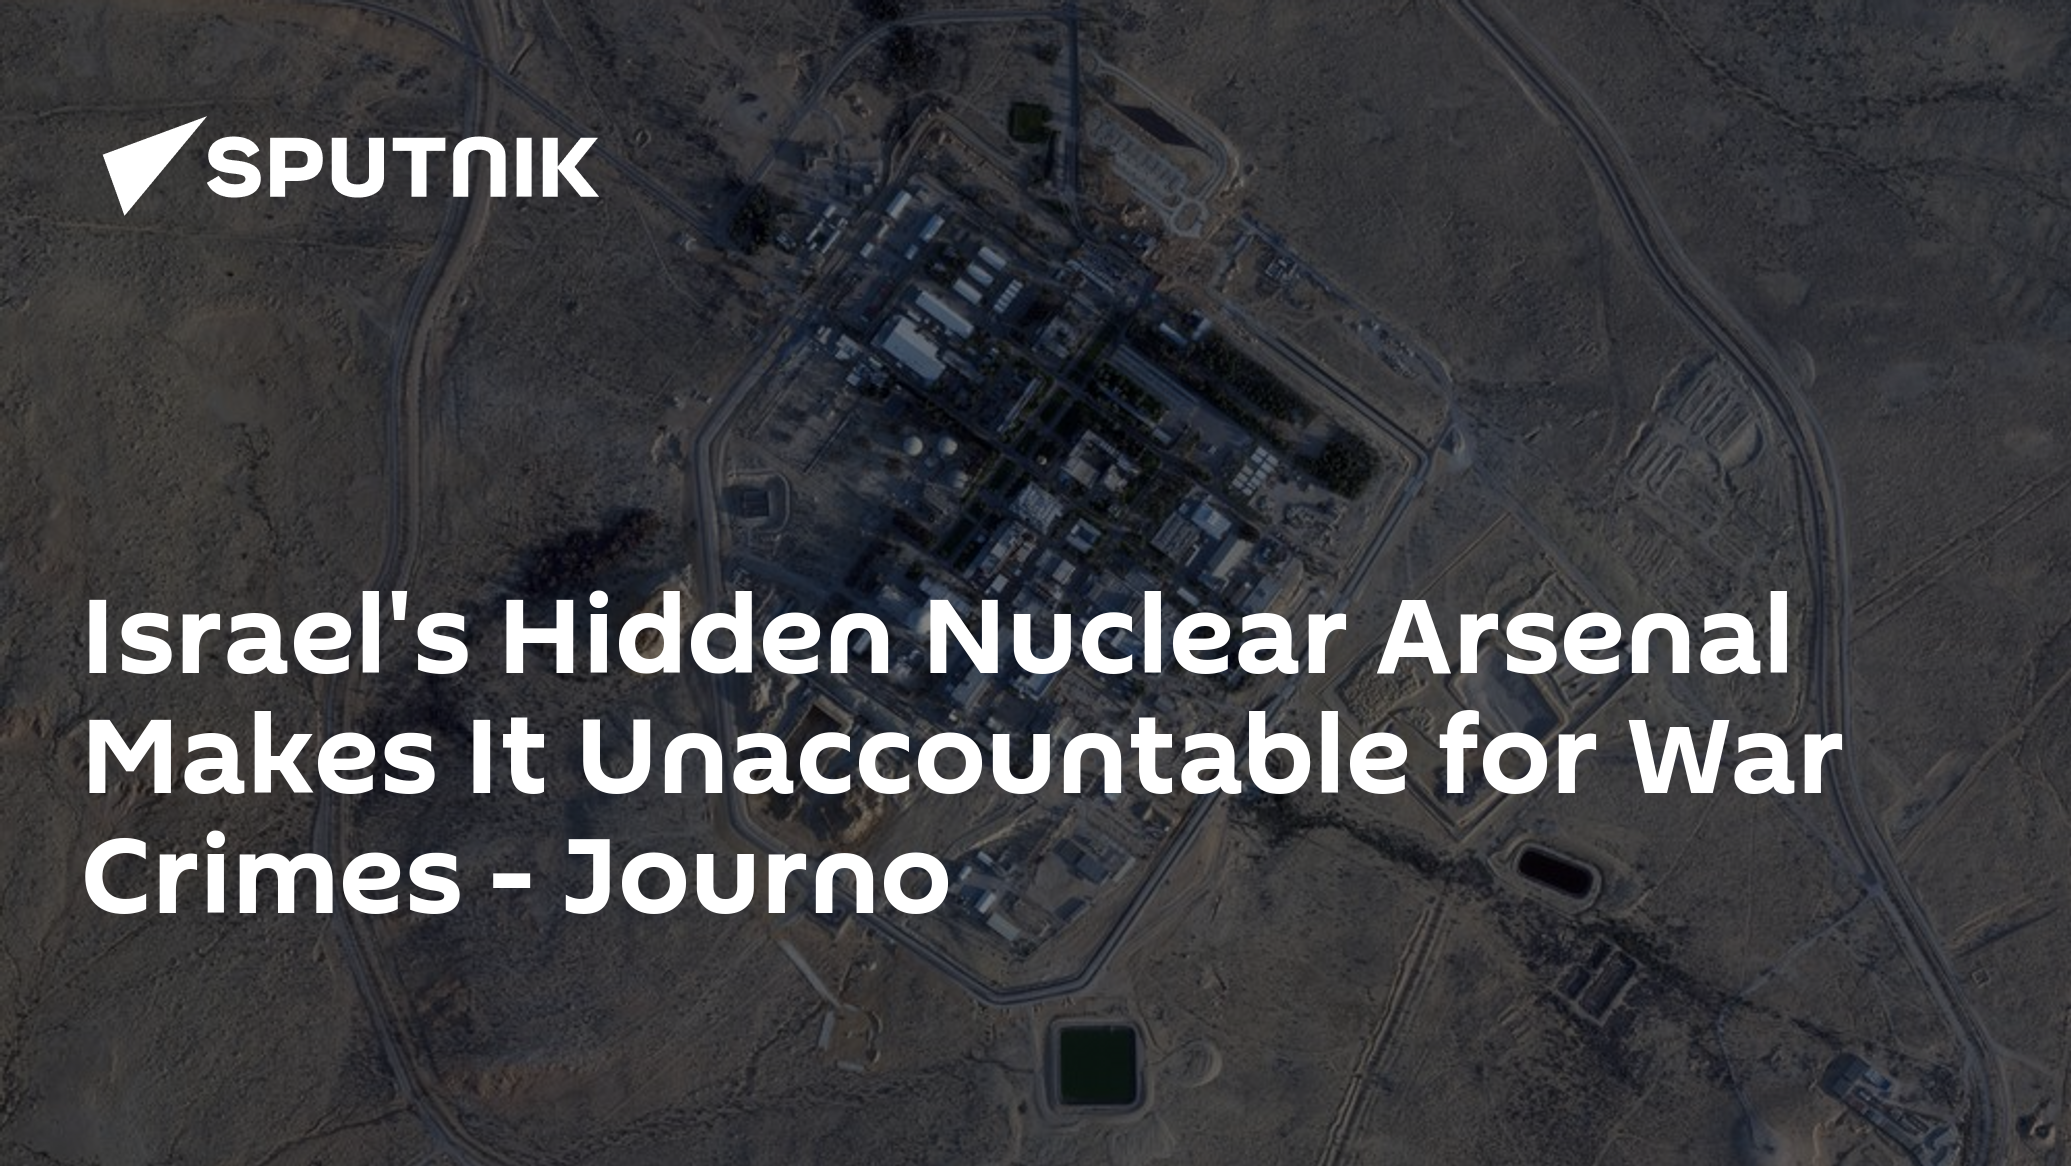 Israel's Hidden Nuclear Arsenal Makes It Unaccountable for War Crimes - Journo